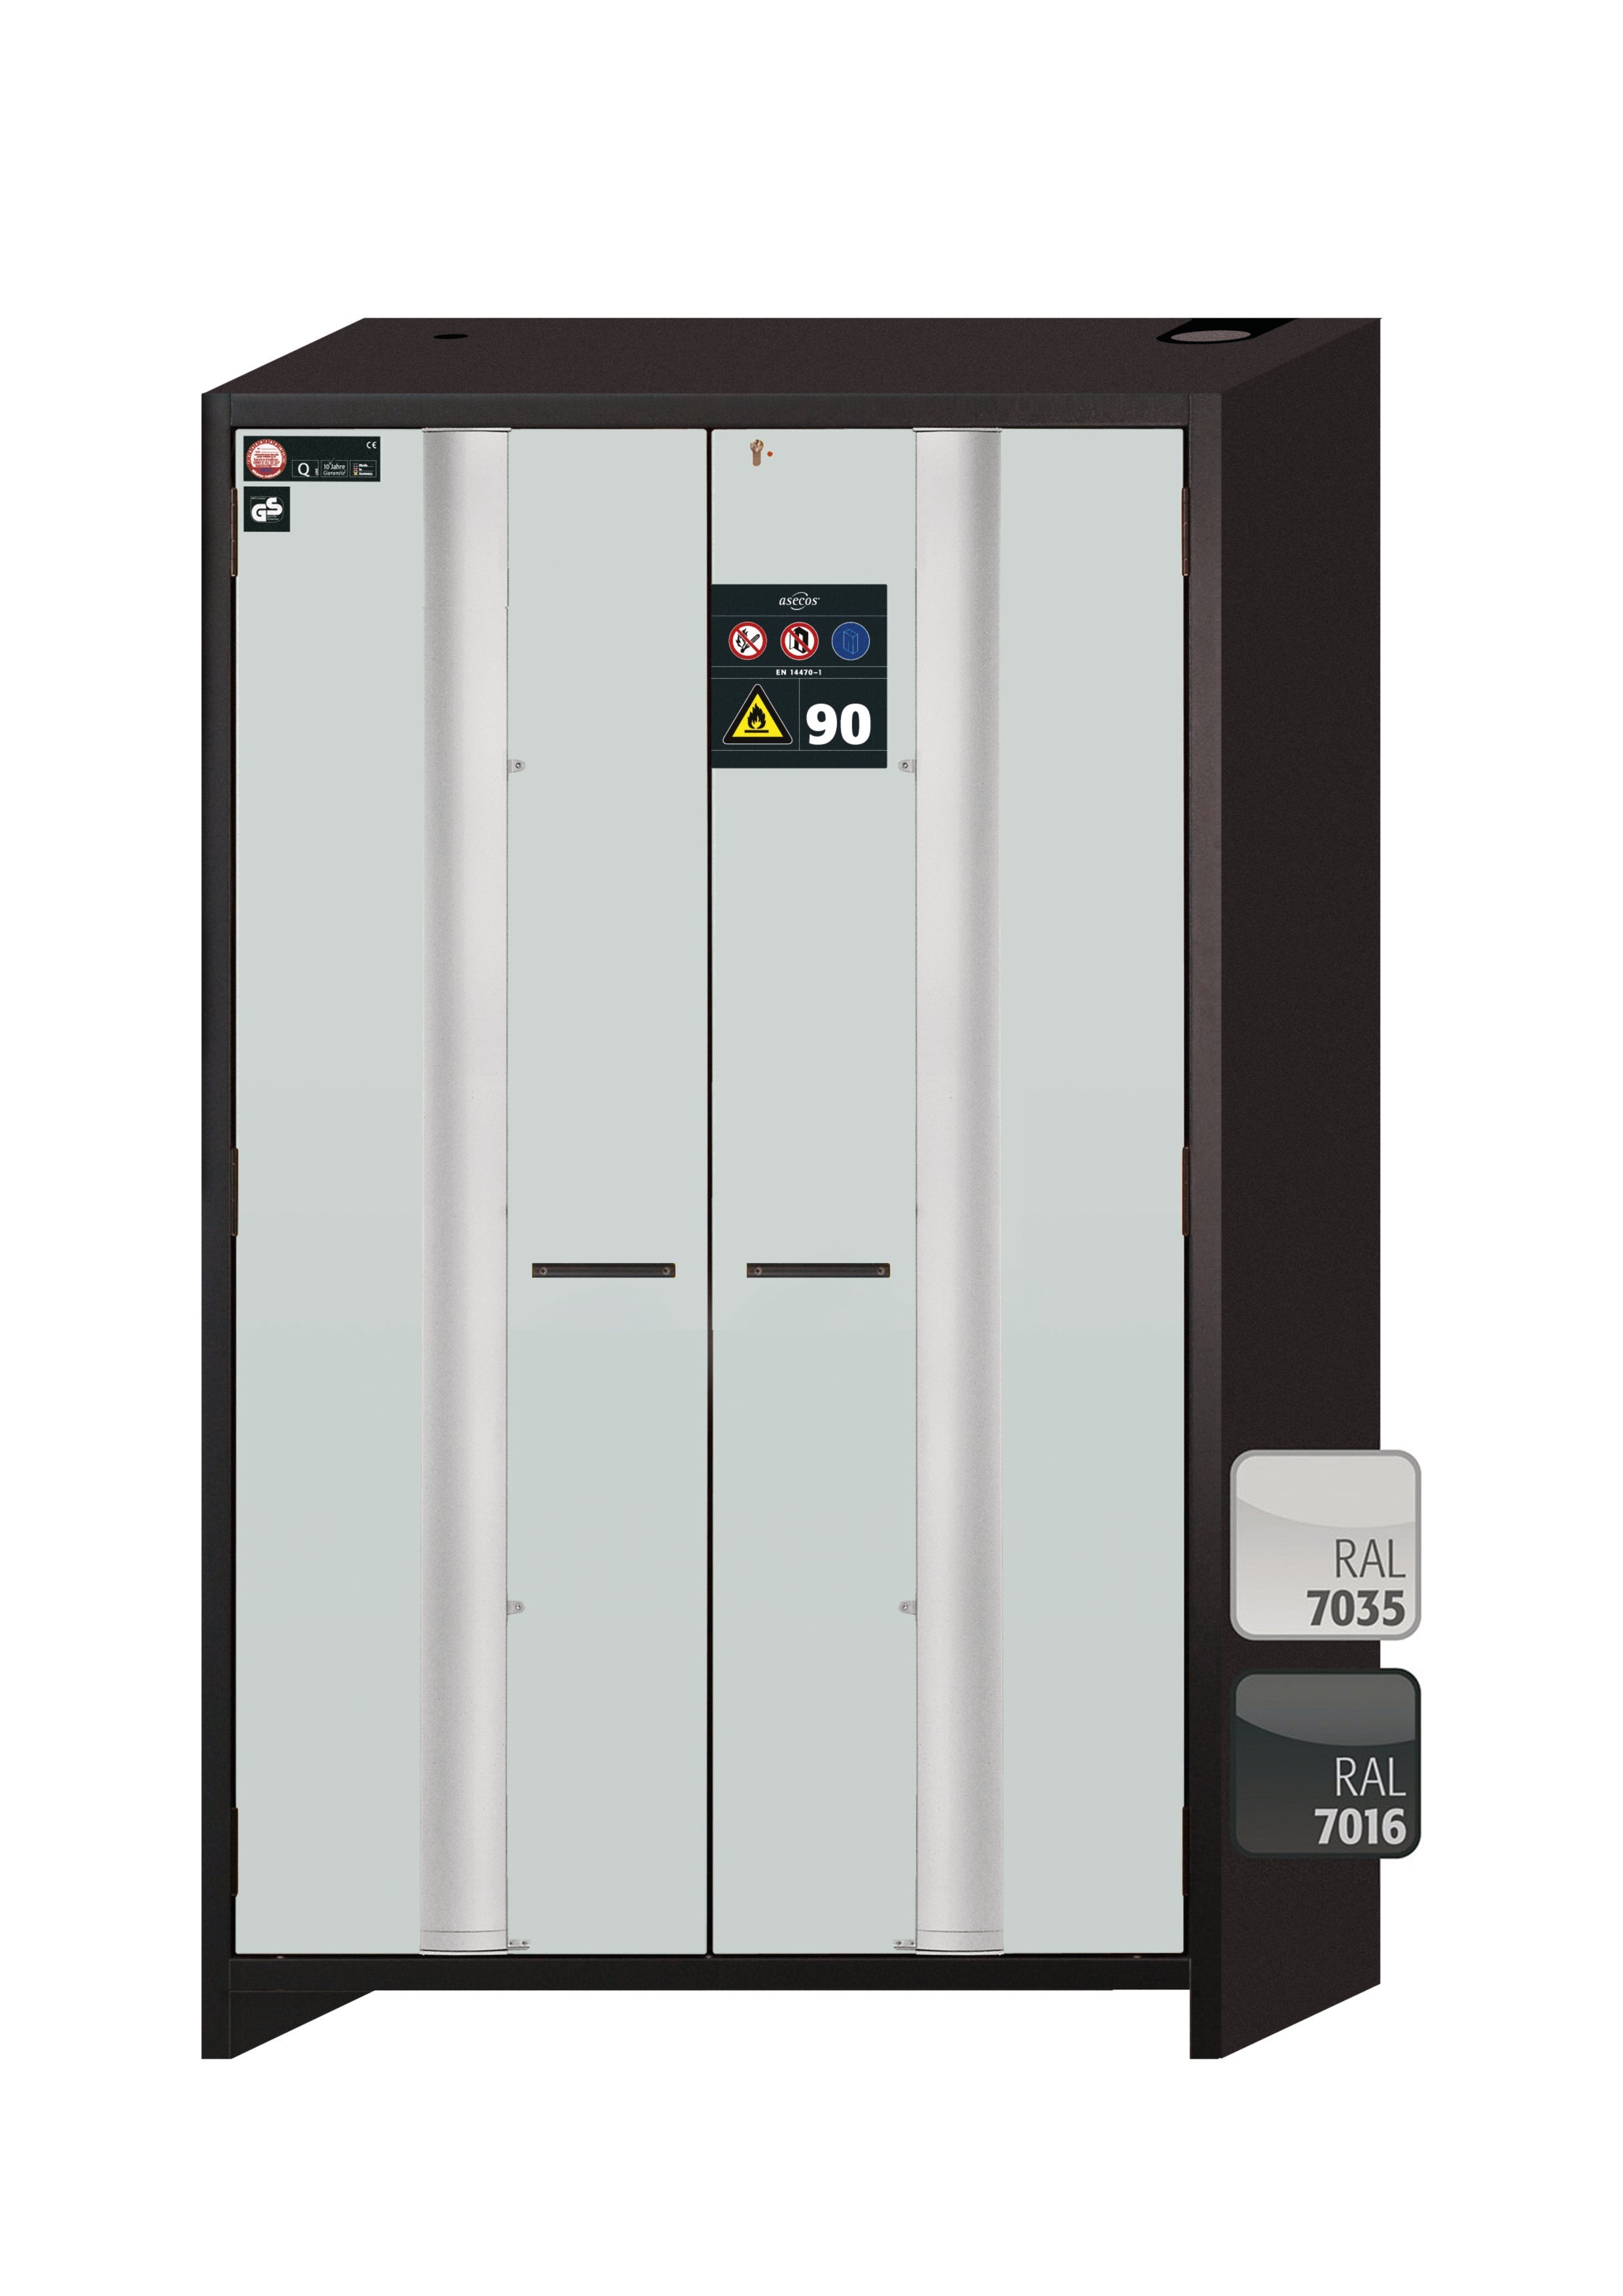 Type 90 safety cabinet Q-PHOENIX-90 model Q90.195.120.FD in light gray RAL 7035 with 2x standard shelves (sheet steel)